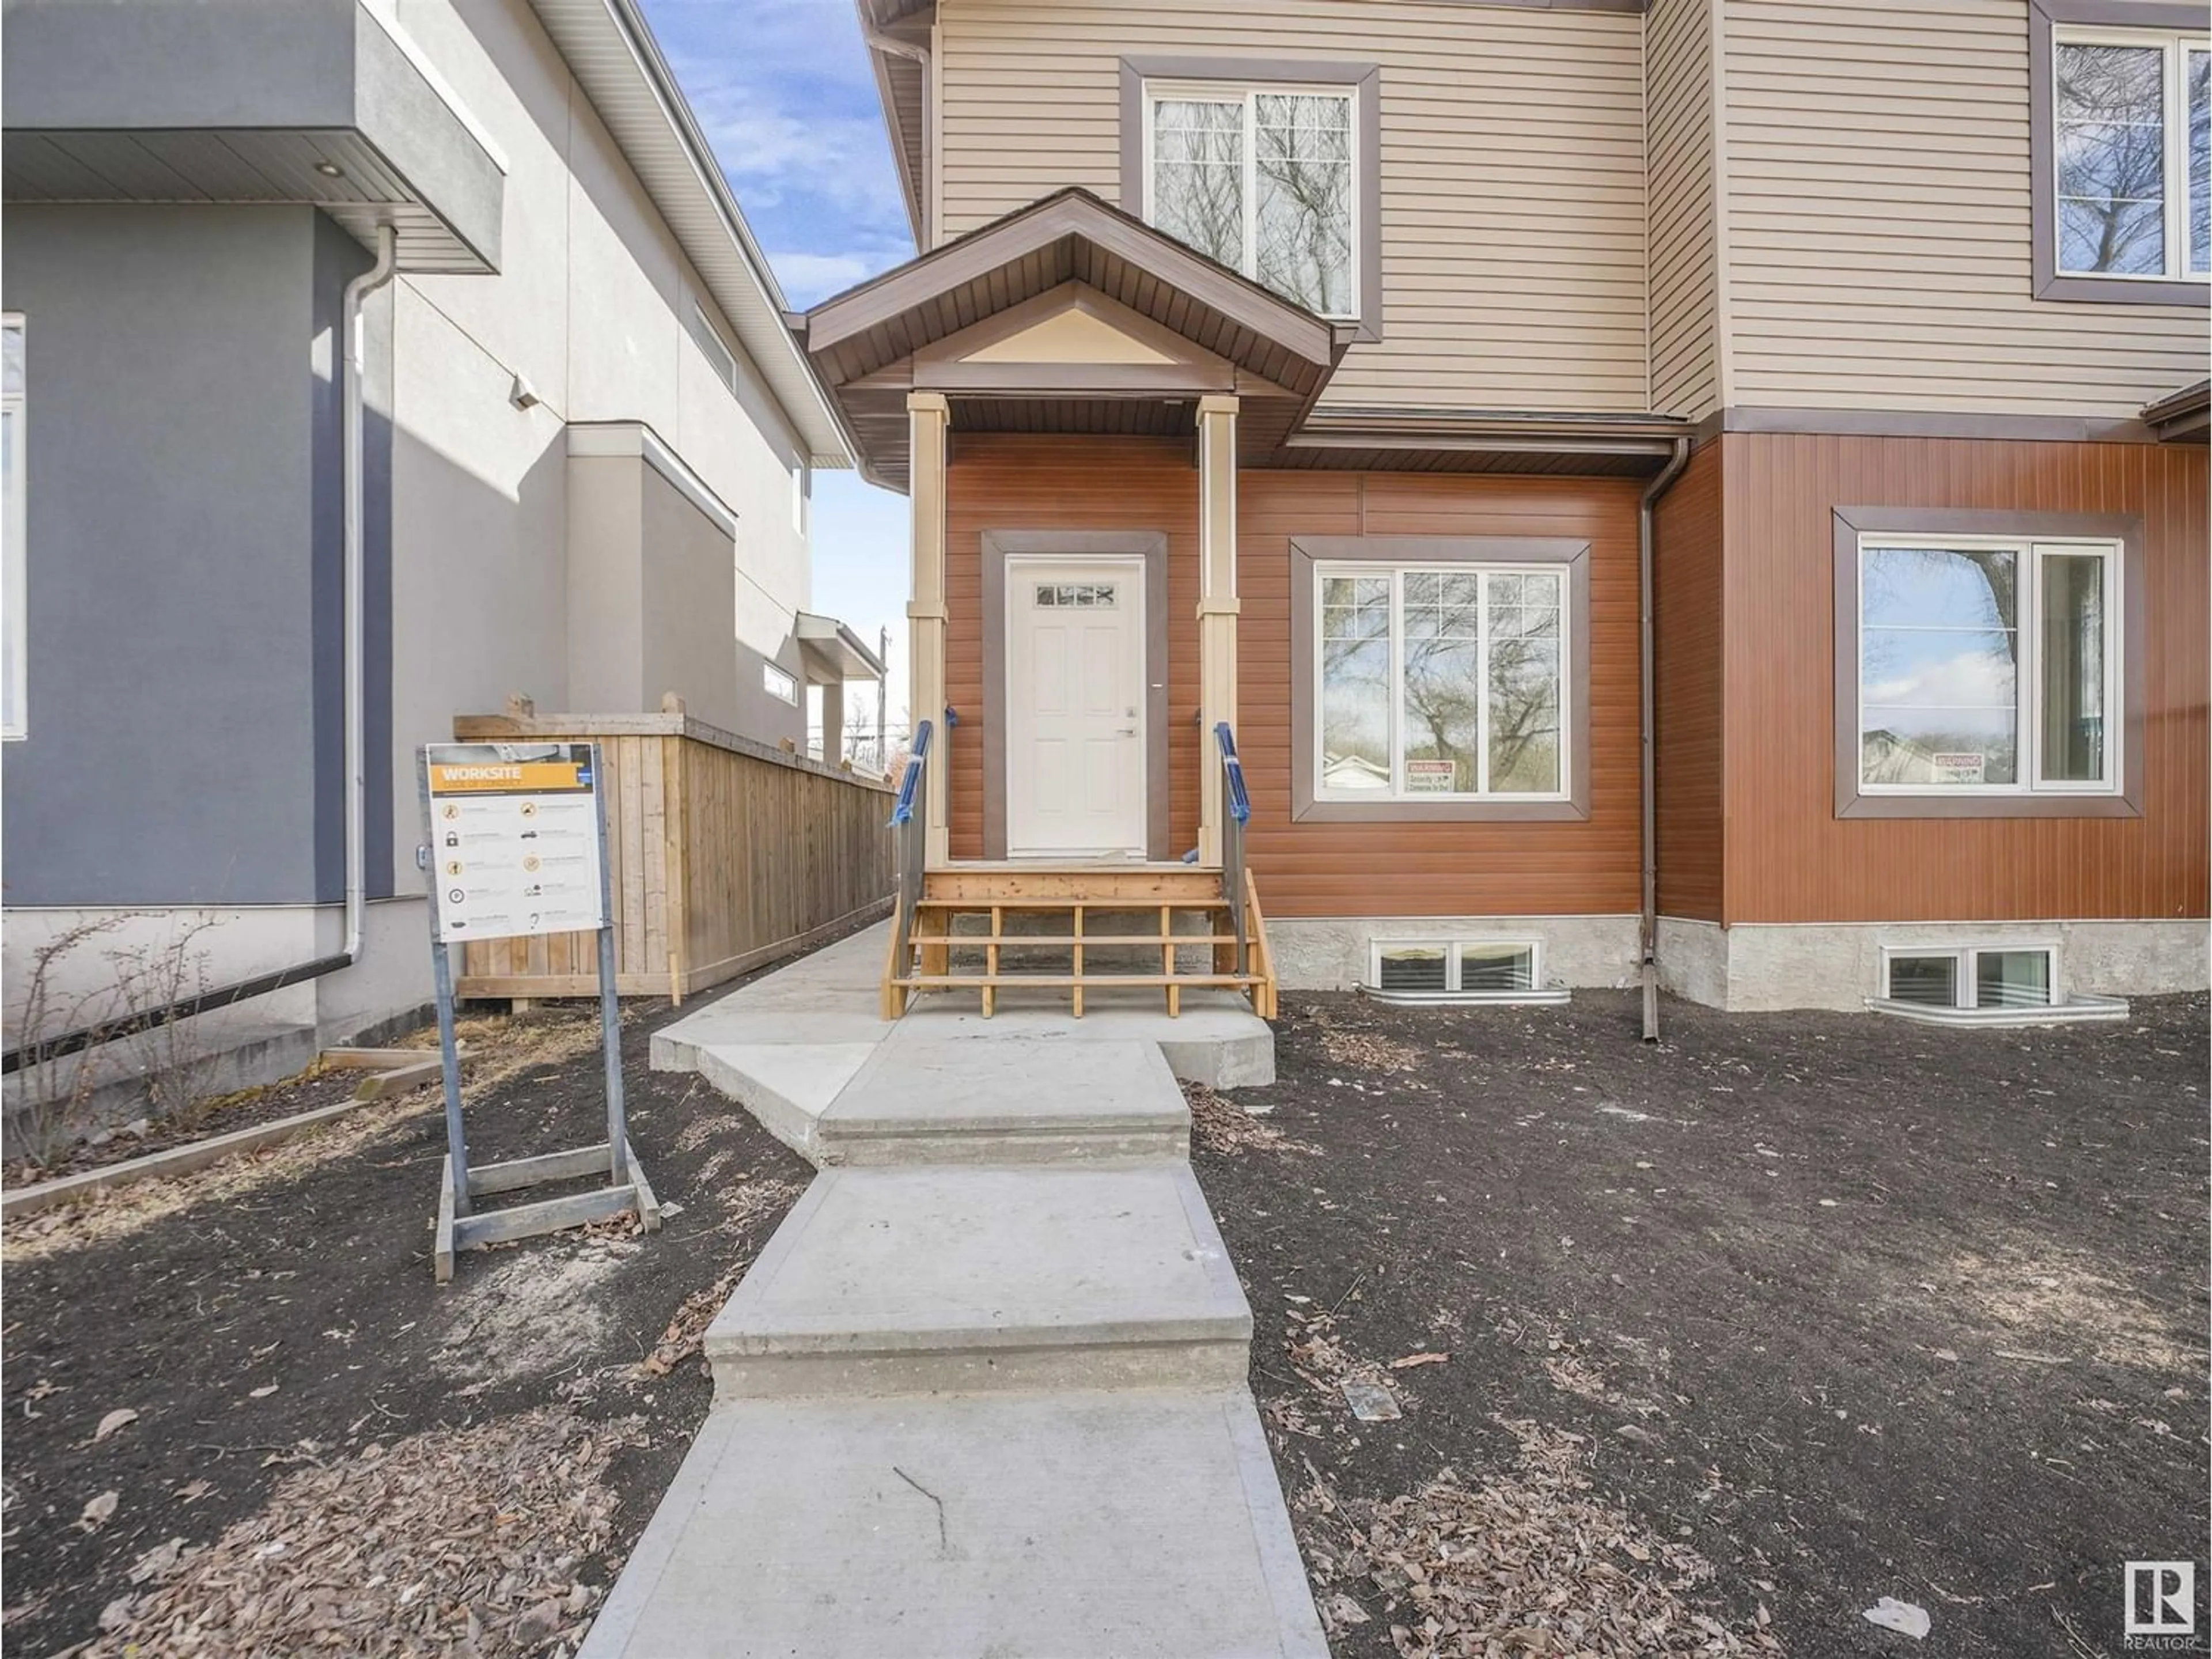 A pic from exterior of the house or condo for 10947 73 AV NW, Edmonton Alberta T6G0C3